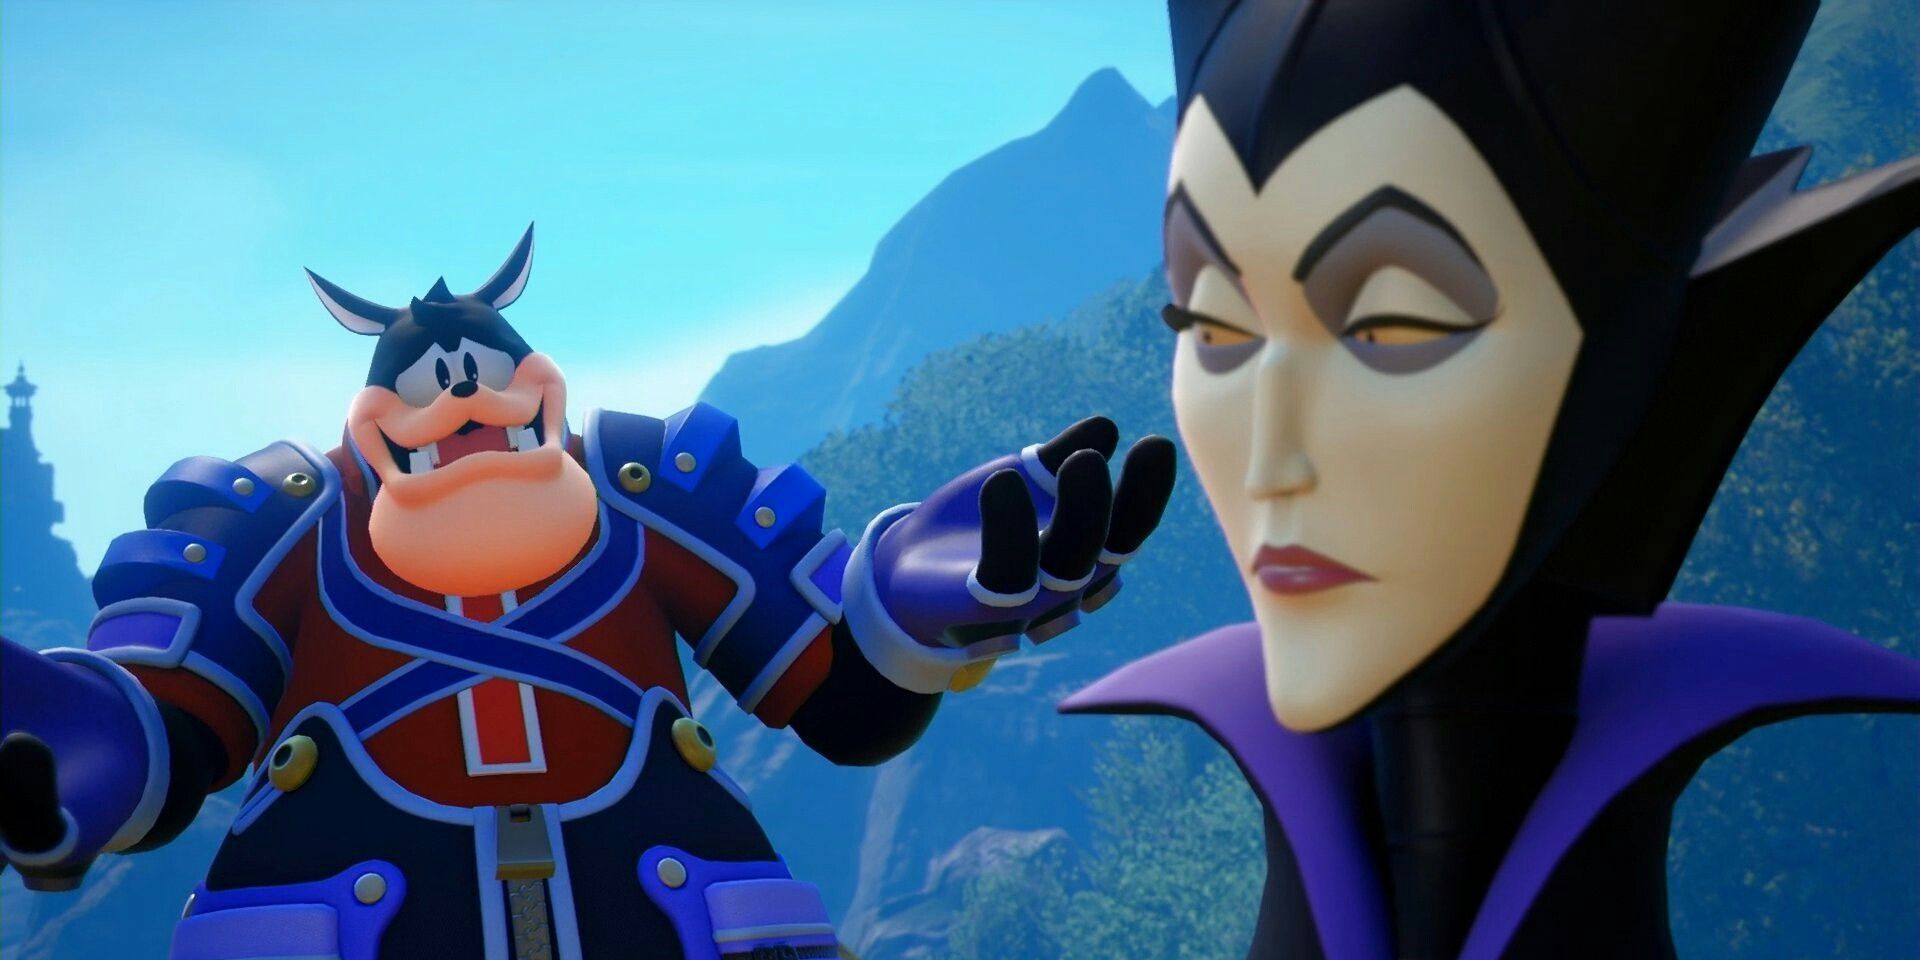 Maleficent and Pete, seen here being criminally underutilized and probably talking abotu a box.